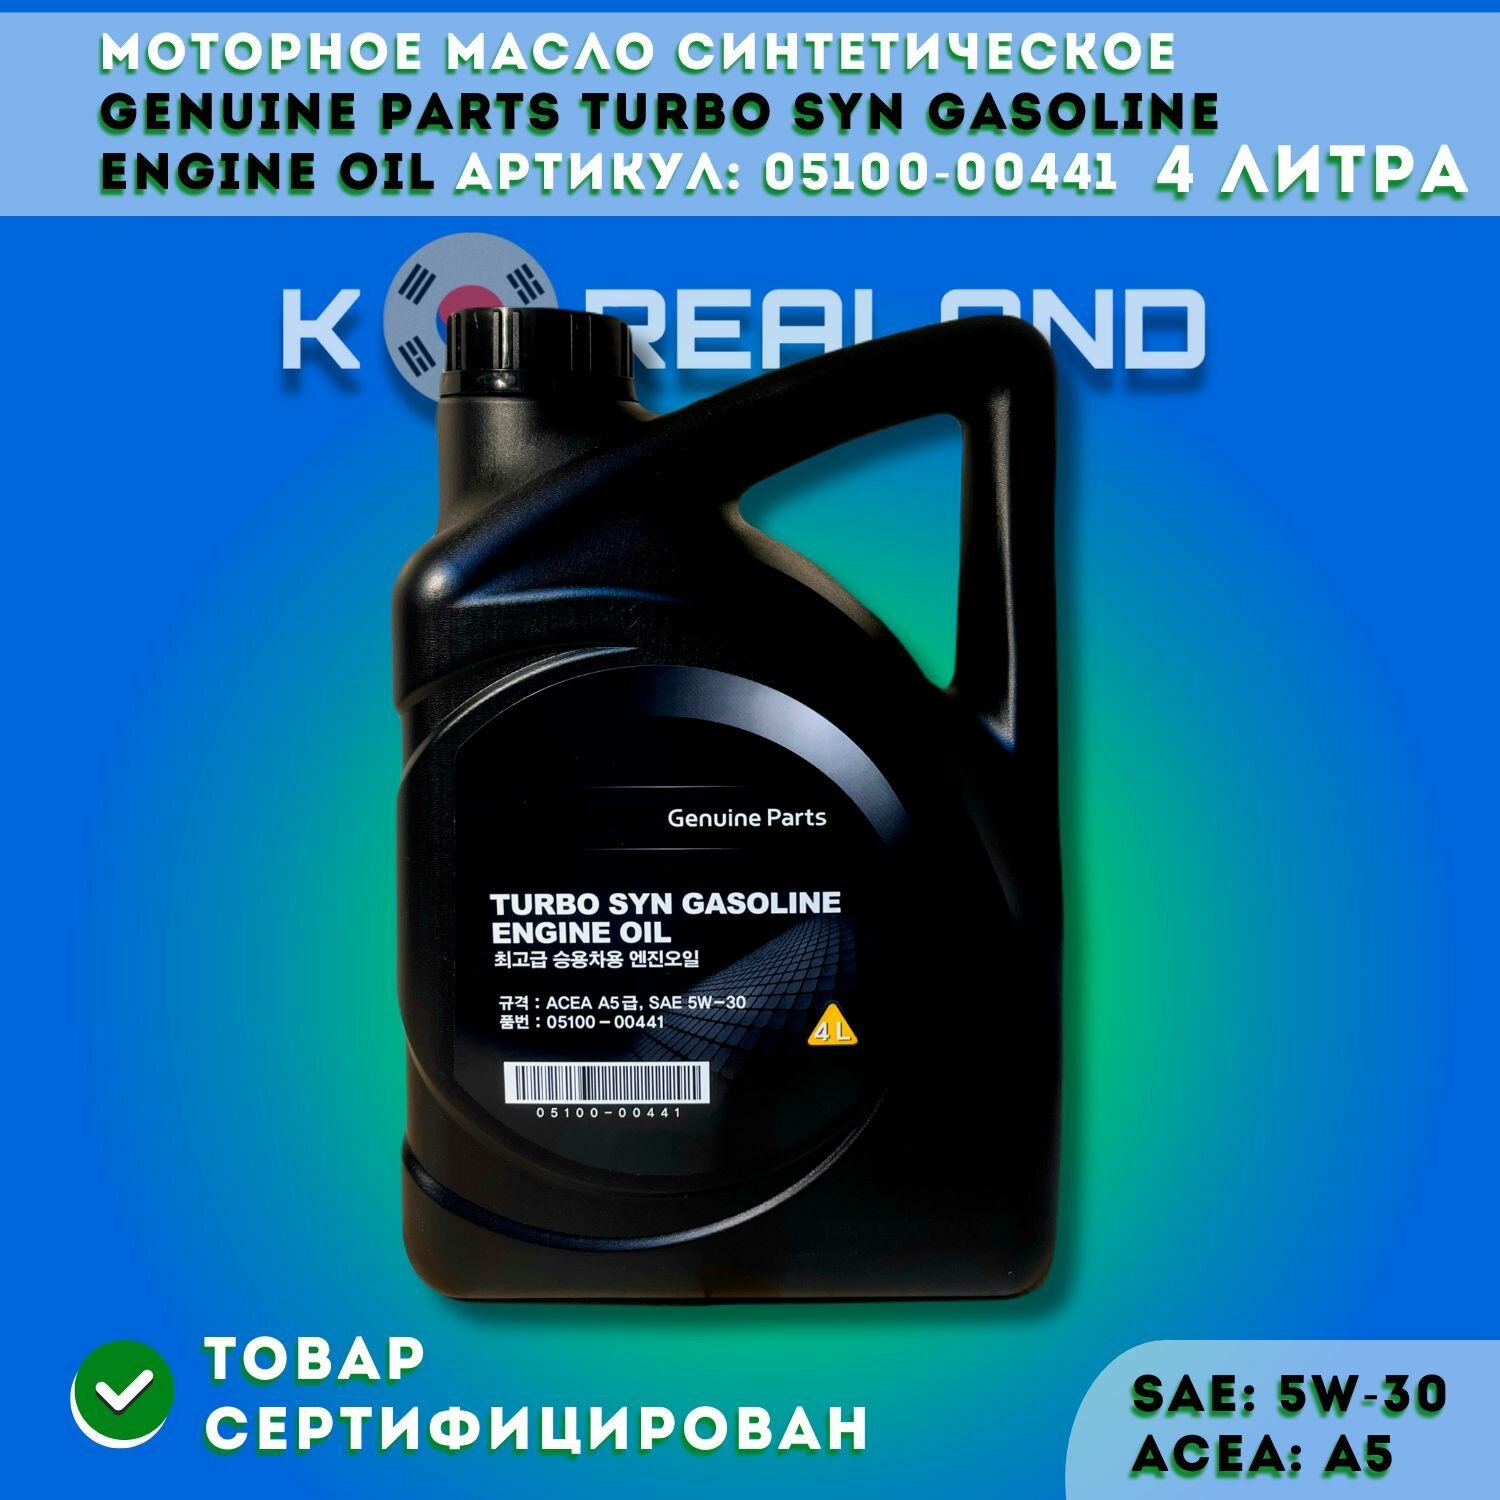 Моторное масло Genuine Parts Turbo Syn Gasoline Engine Oil 4 литра